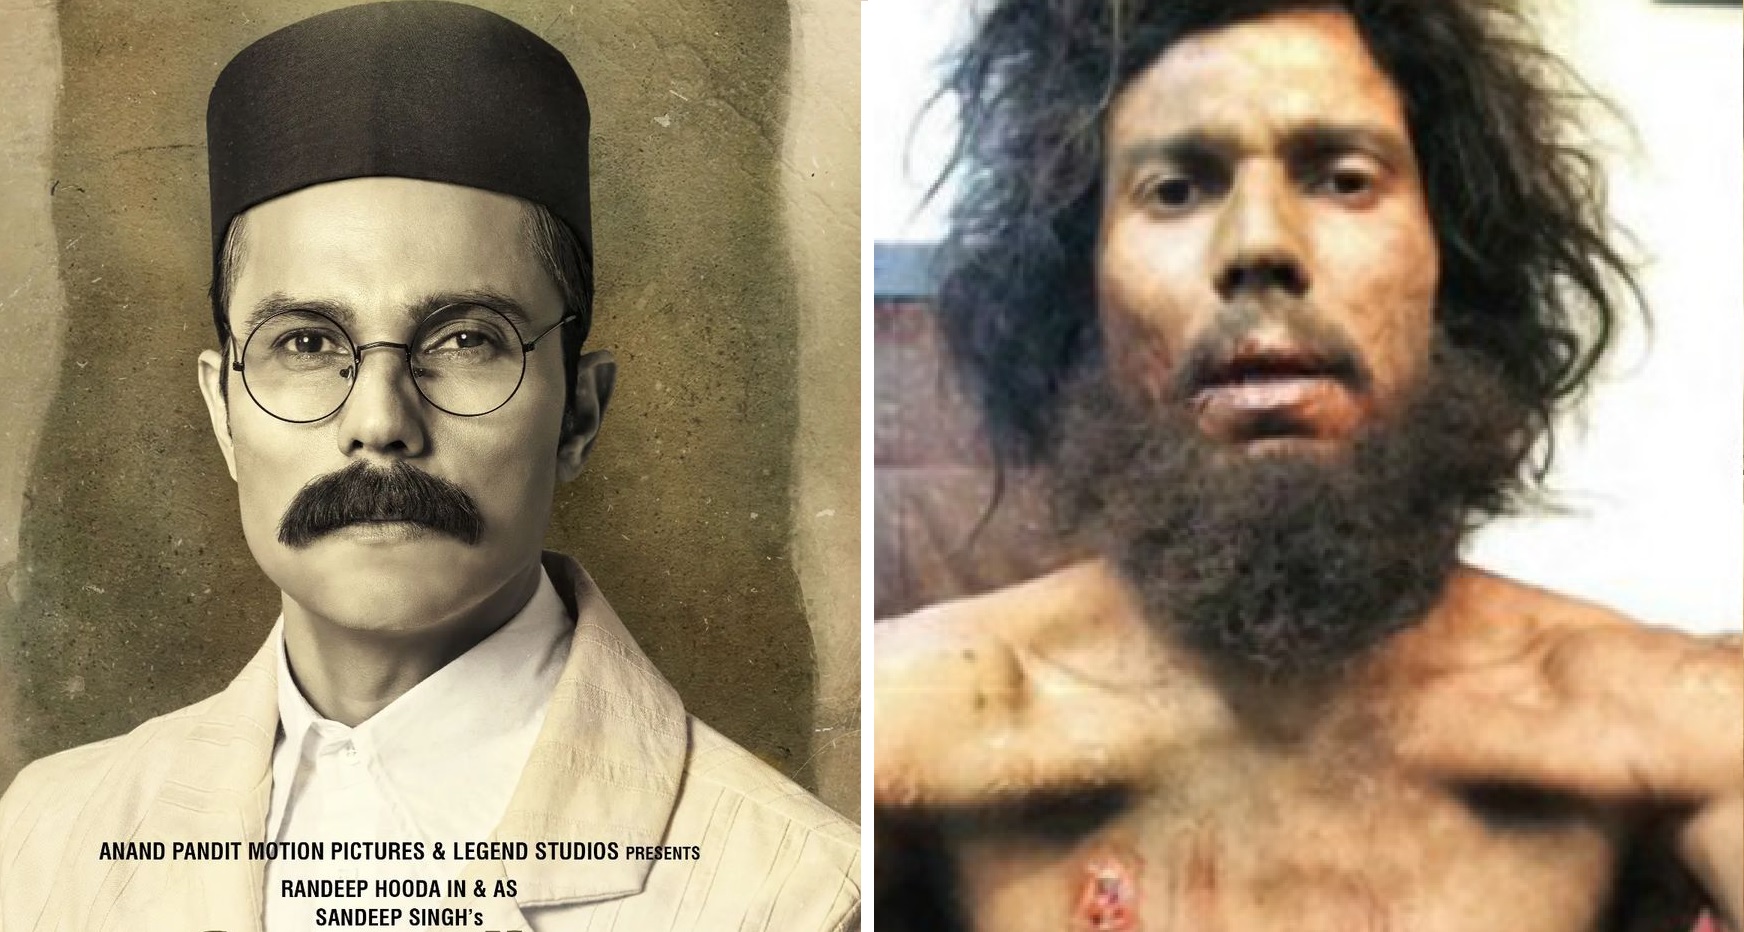 Randeep Hooda’s EPIC Body Transformation To Play The Role Of Veer Savarkar, “I have lost 14-16 kilos, will lose more…”